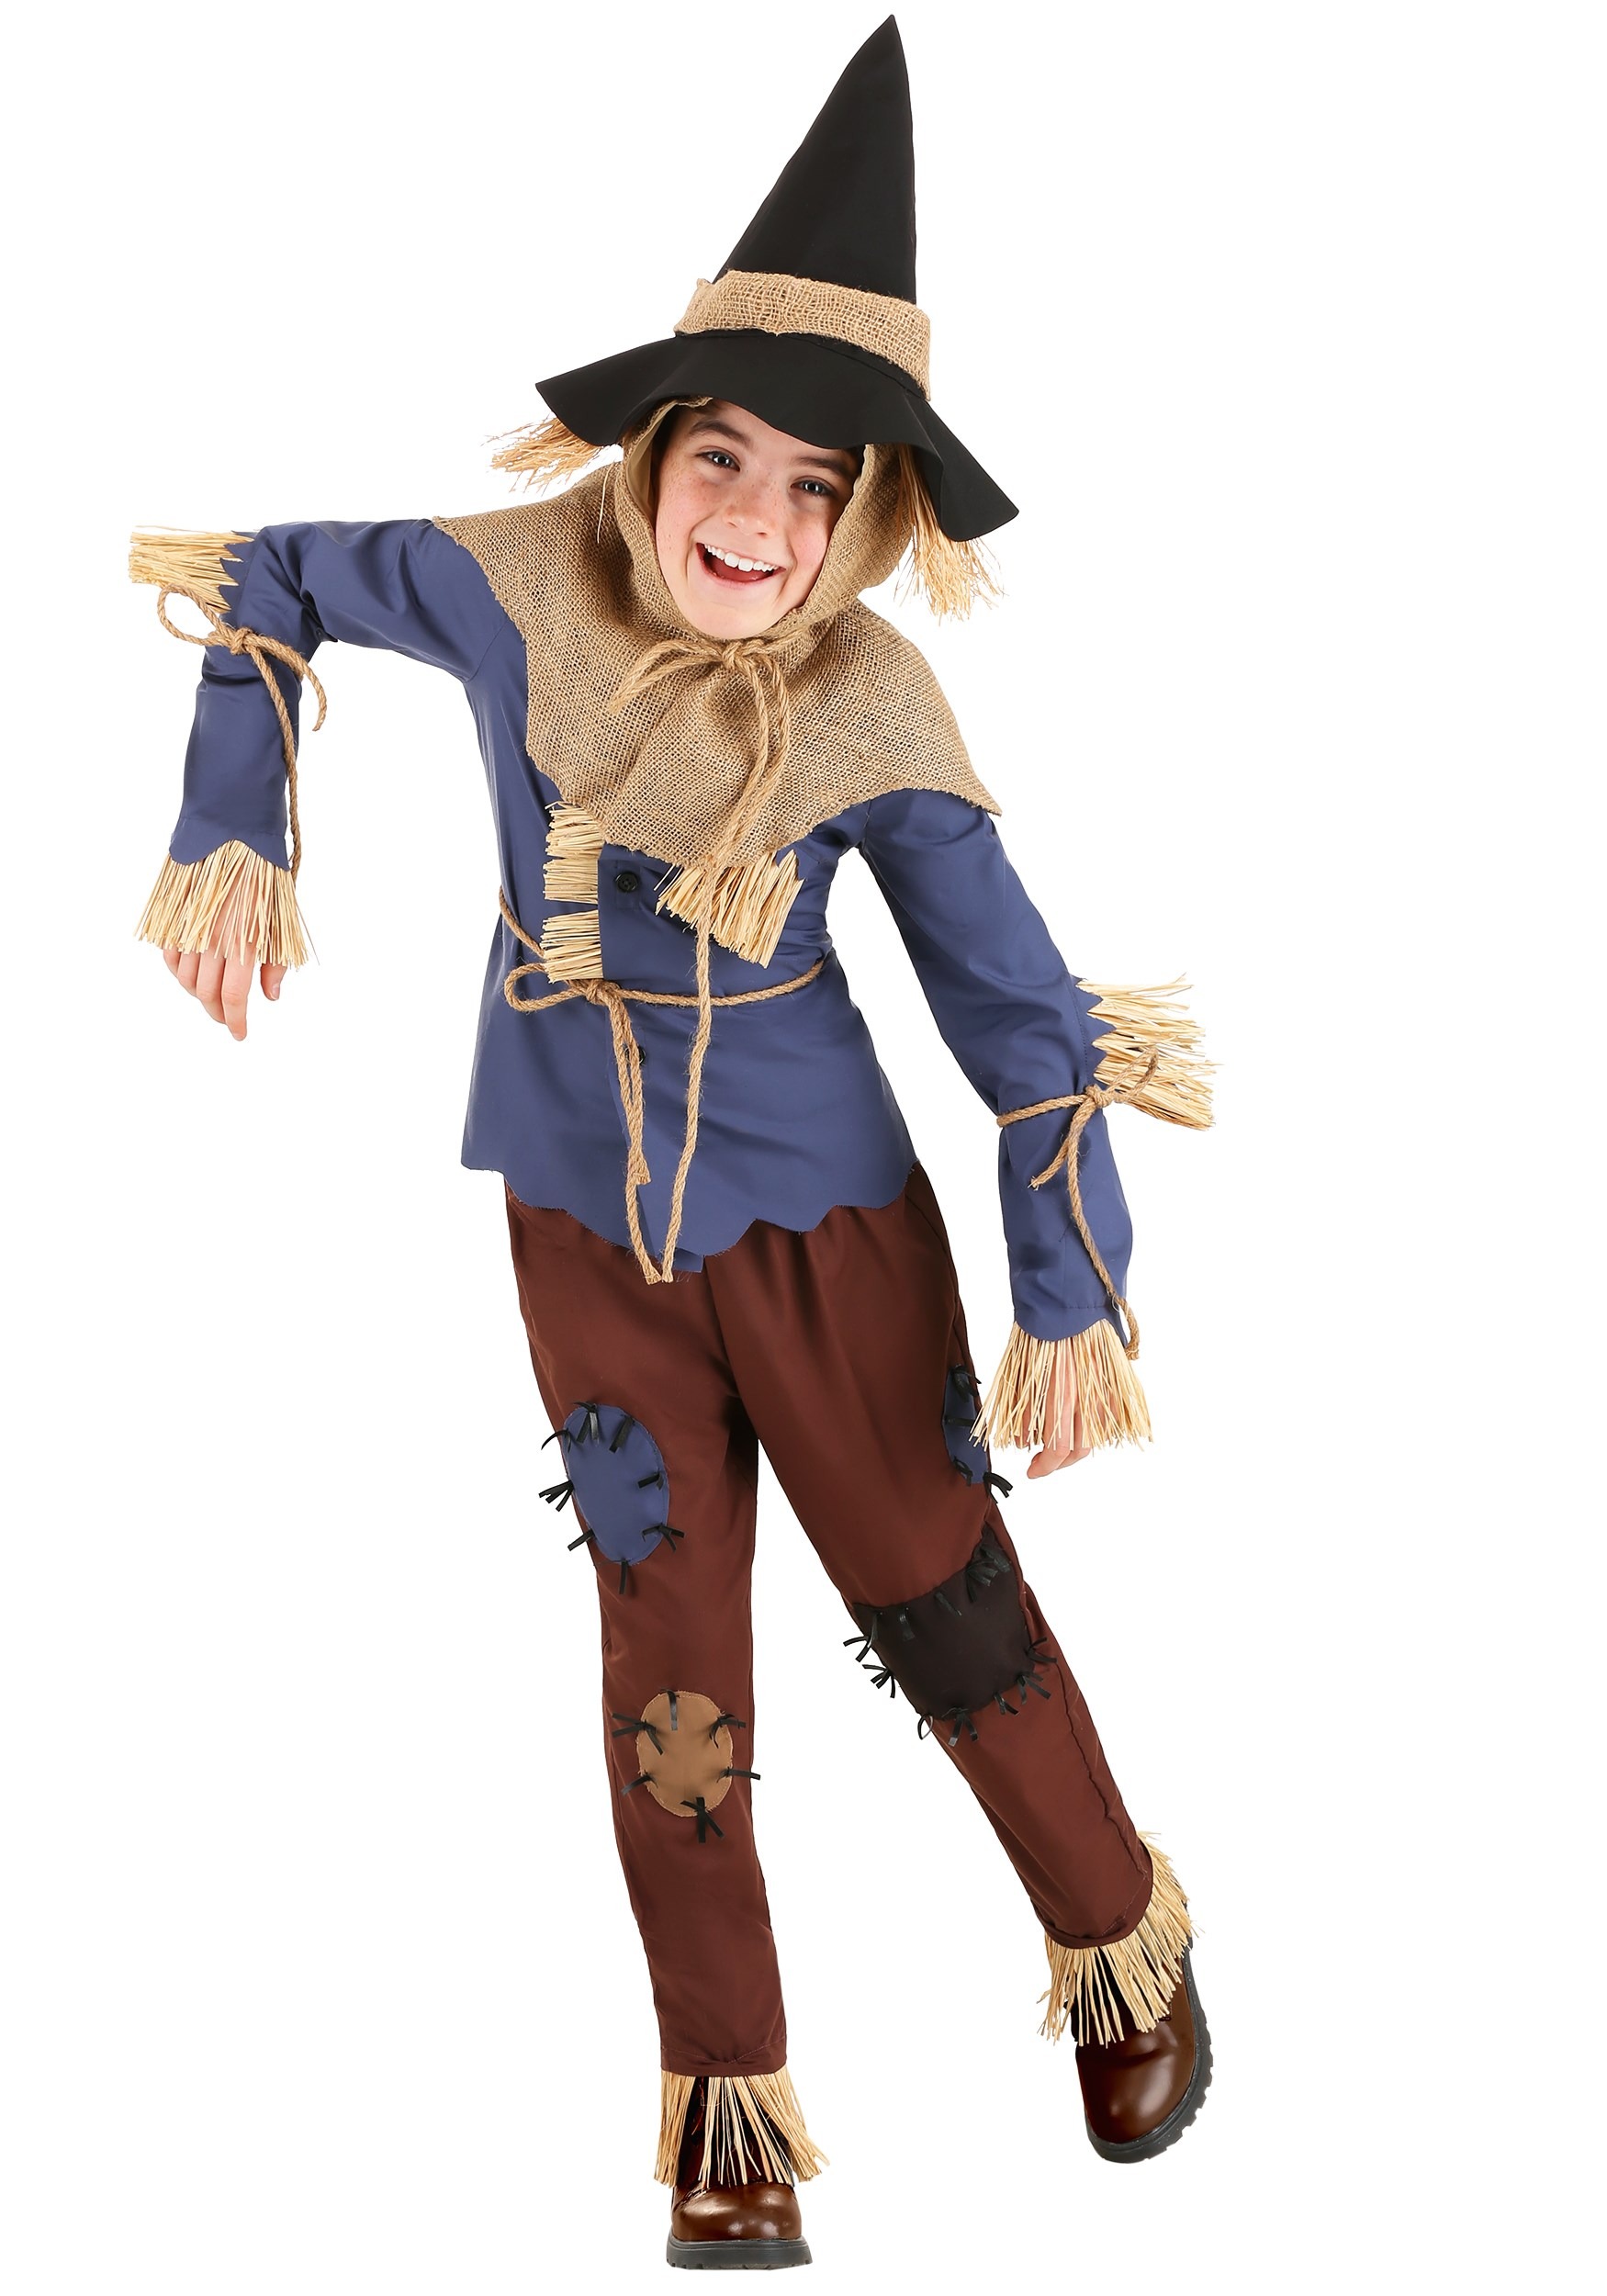 Photos - Fancy Dress FUN Costumes Happy Scarecrow Costume for Kid's Blue/Brown/Beige FU